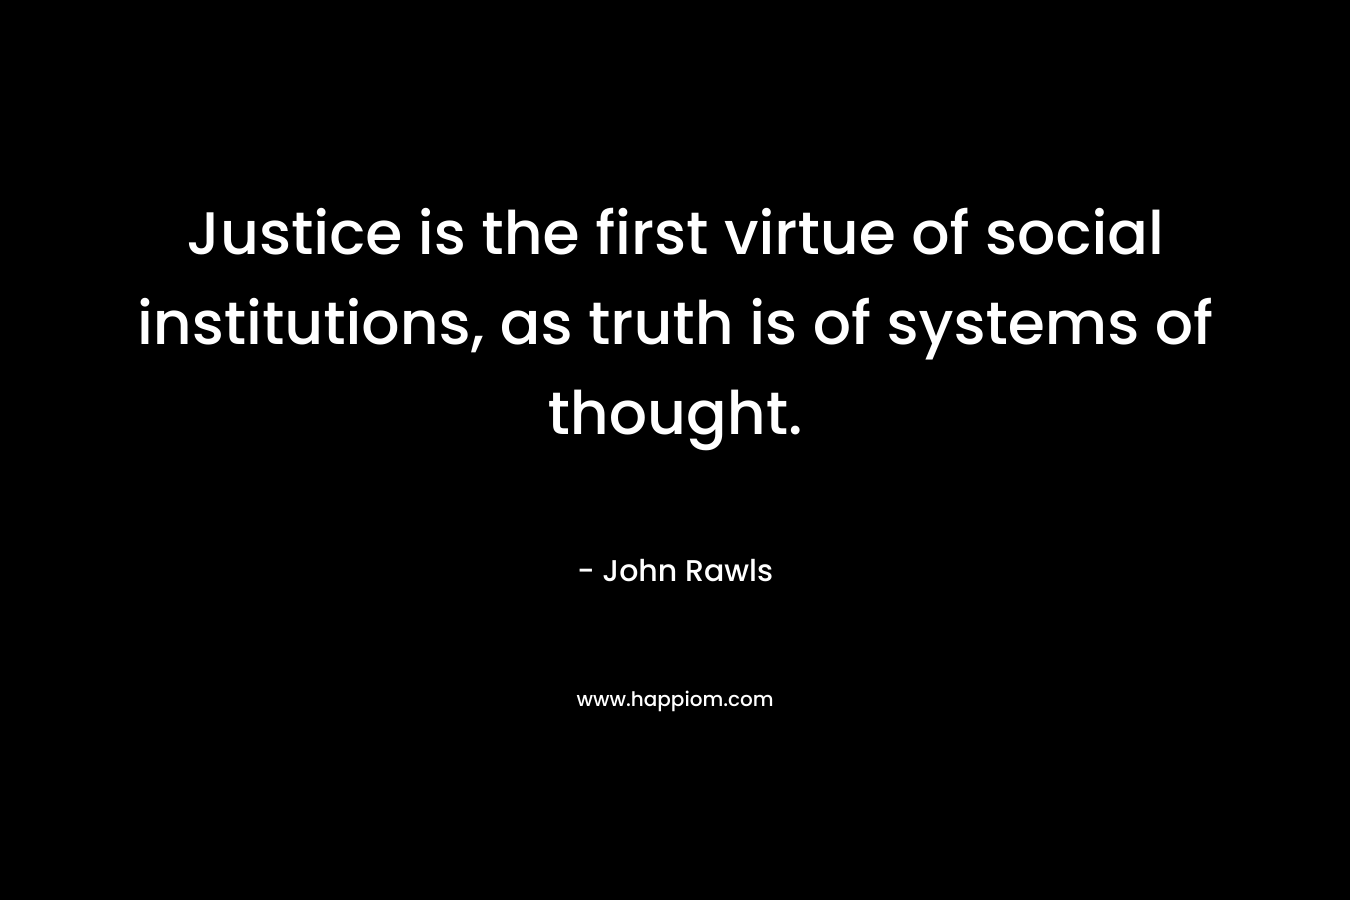 Justice is the first virtue of social institutions, as truth is of systems of thought.